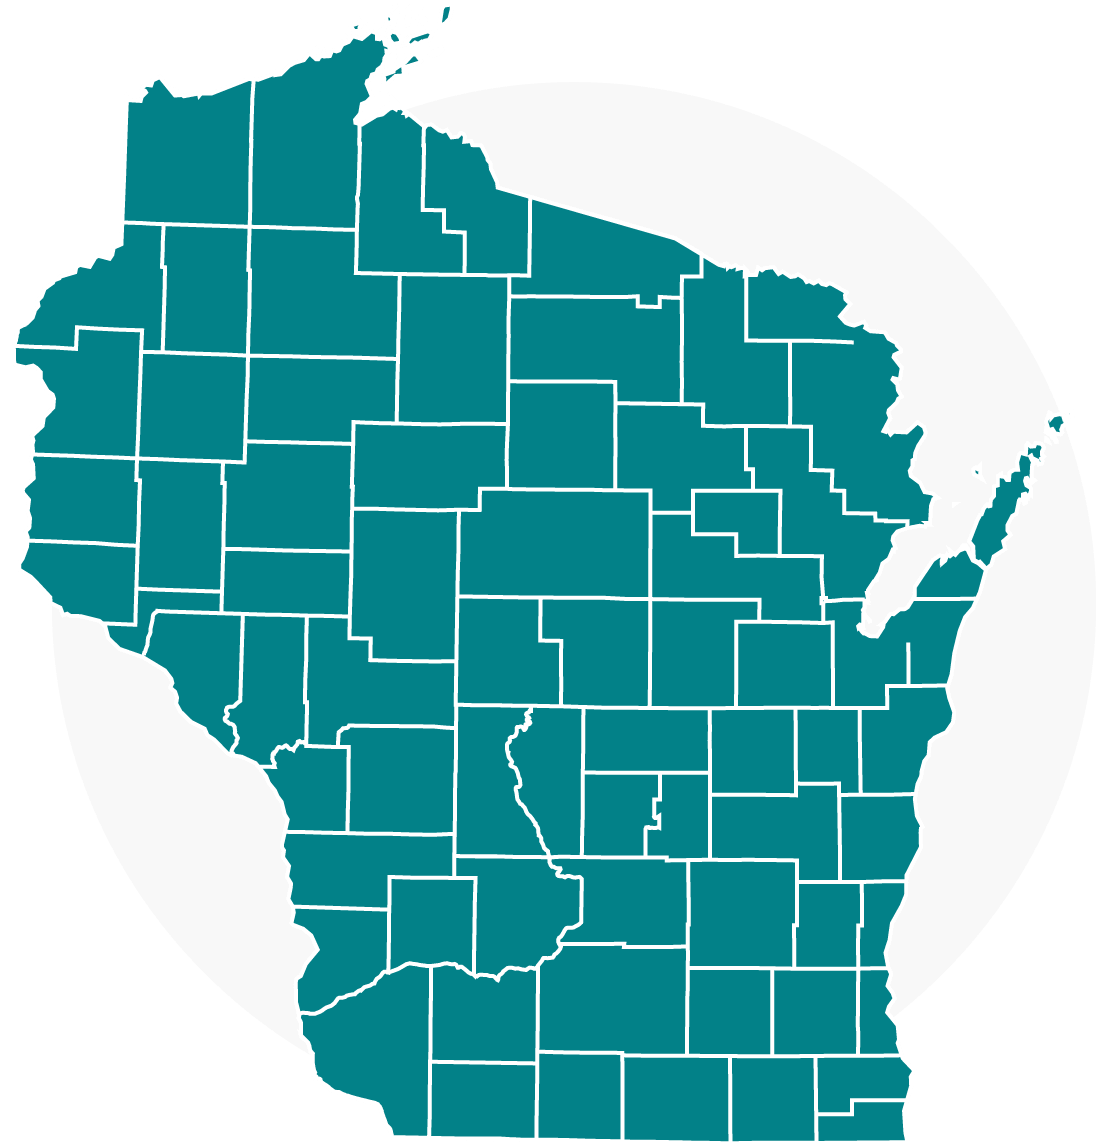 Participant locations on a map of Wisconsin